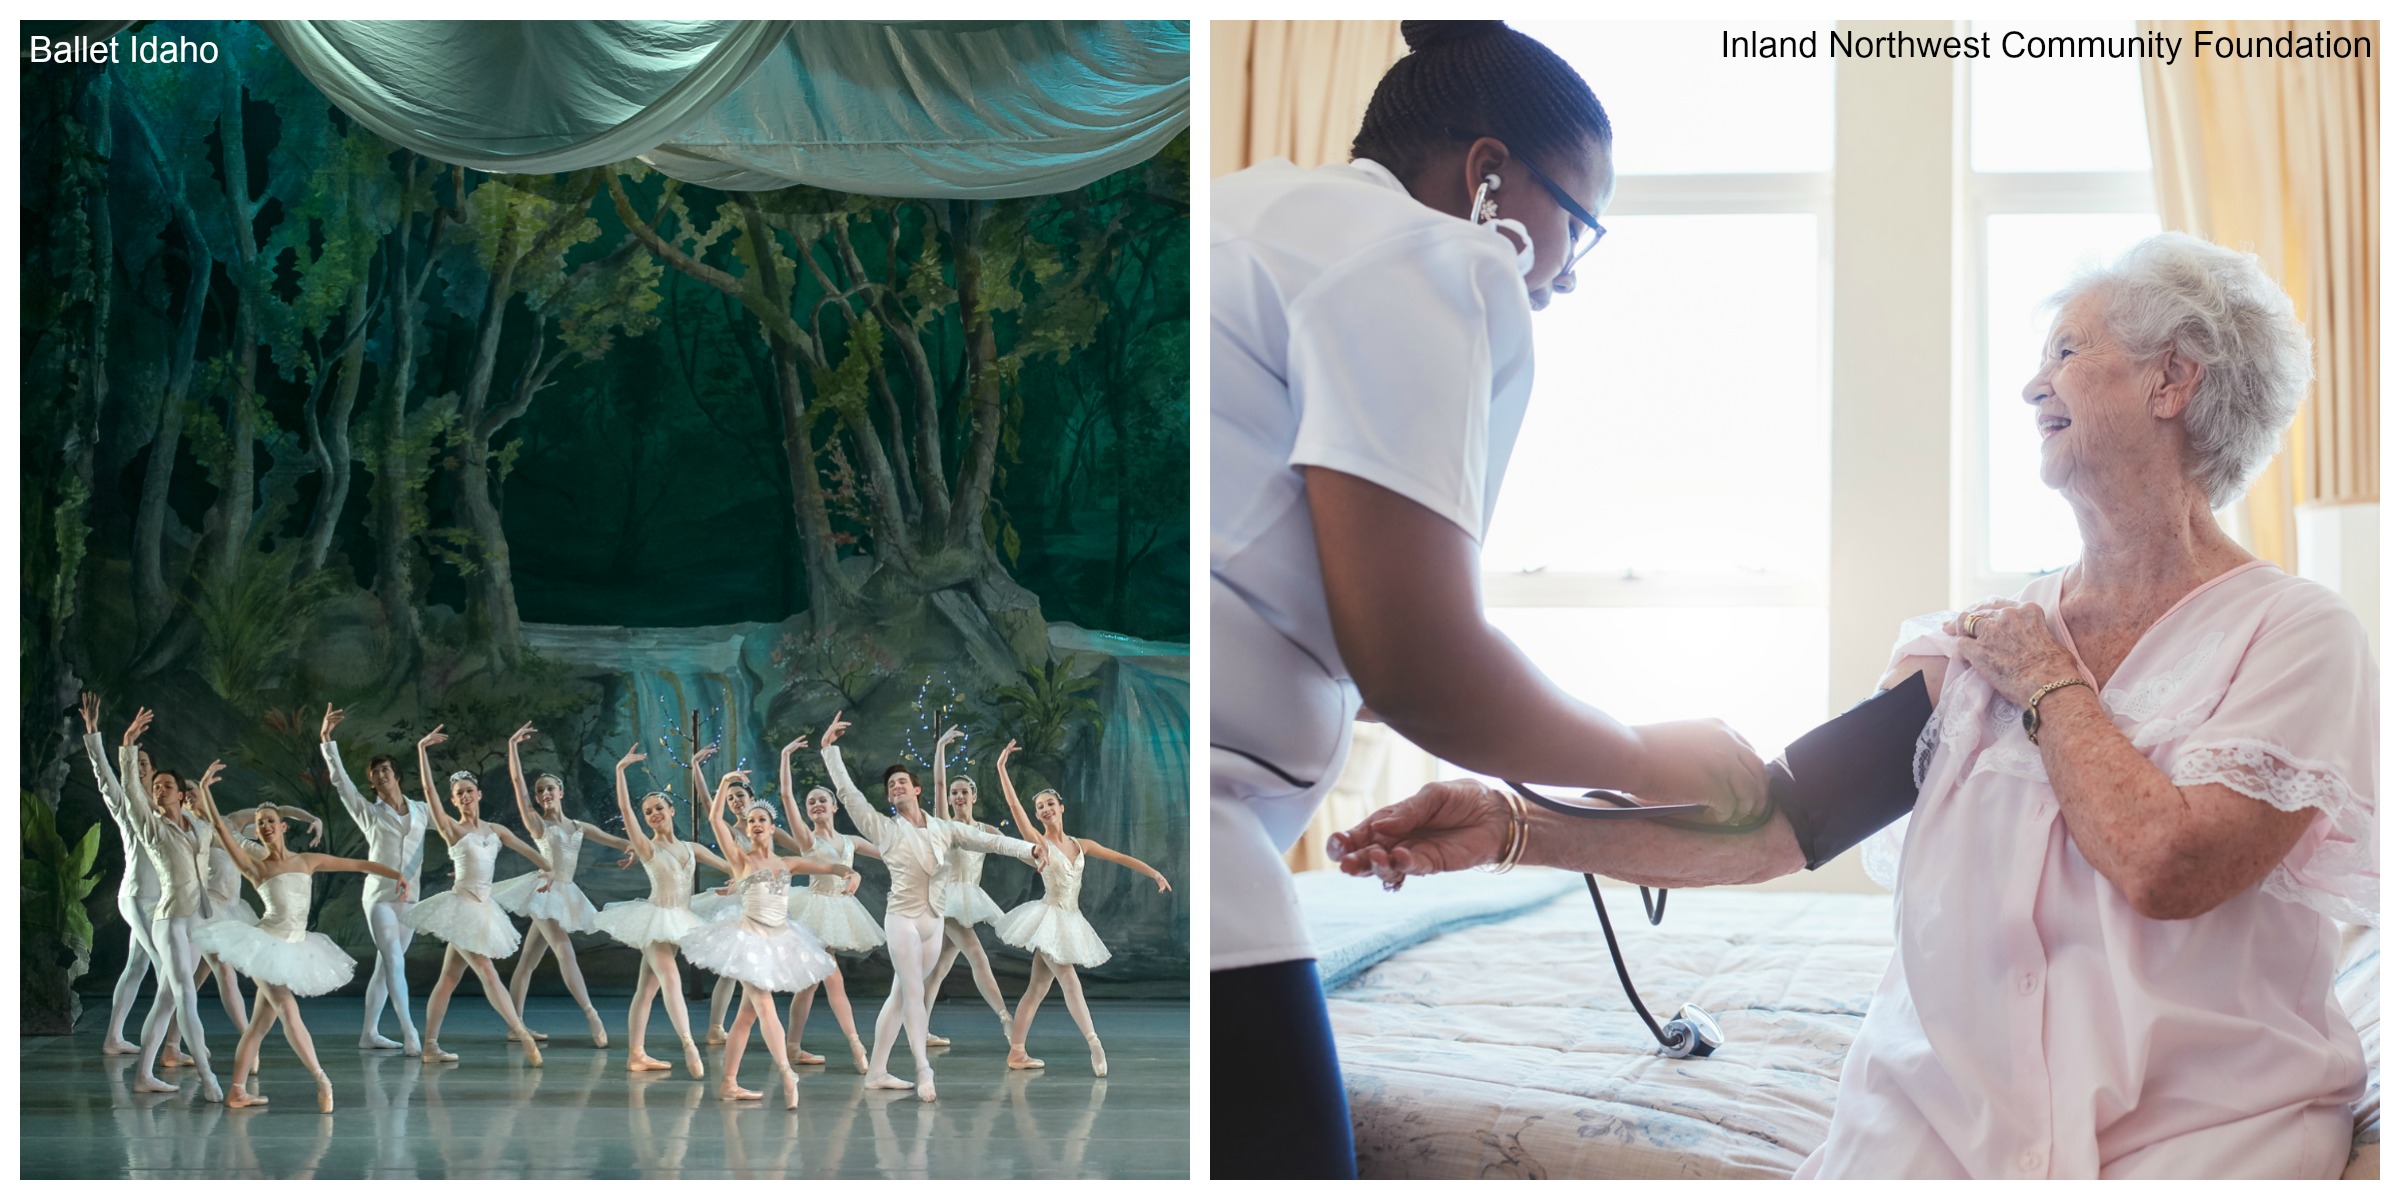 Image 1: a group of ballerinas perform onstage to a stage backdrop of green trees and a waterfall. Text overlay says "Ballet Idaho." Image 2: a woman with gray hair sits on a bed and smiles while a nurse with dark hair and glasses takes her blood pressure. 